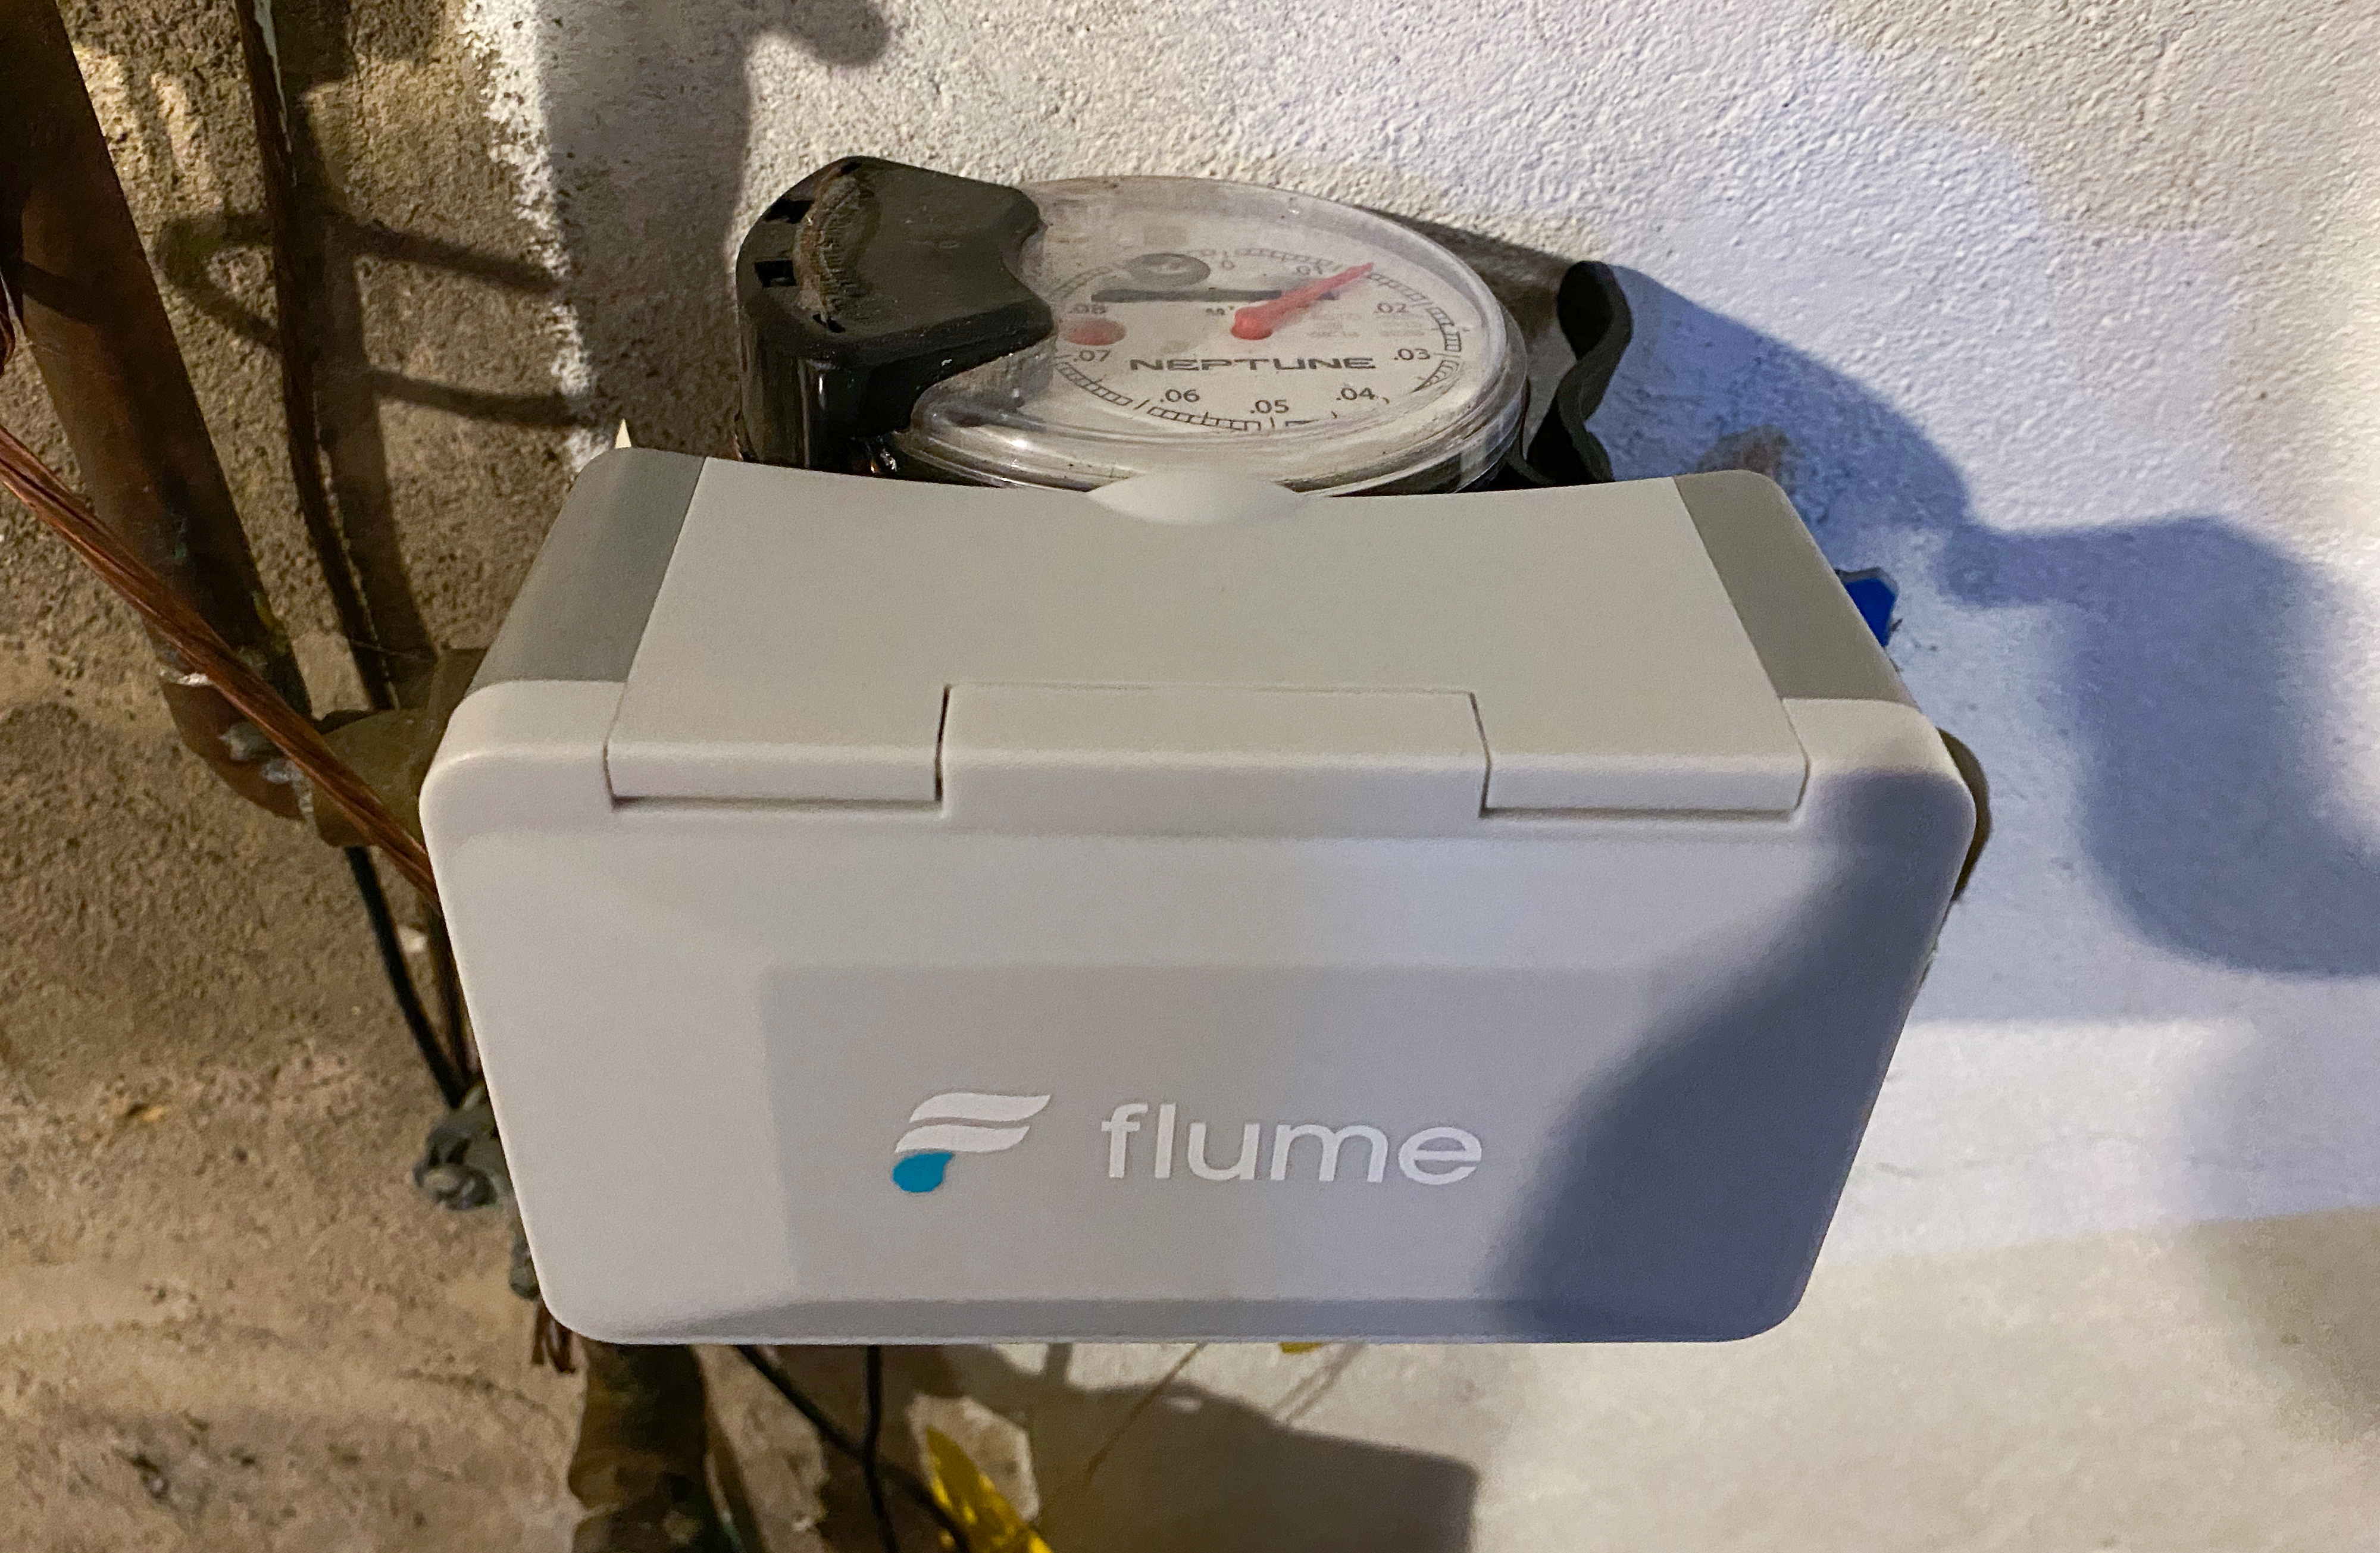 flume water device